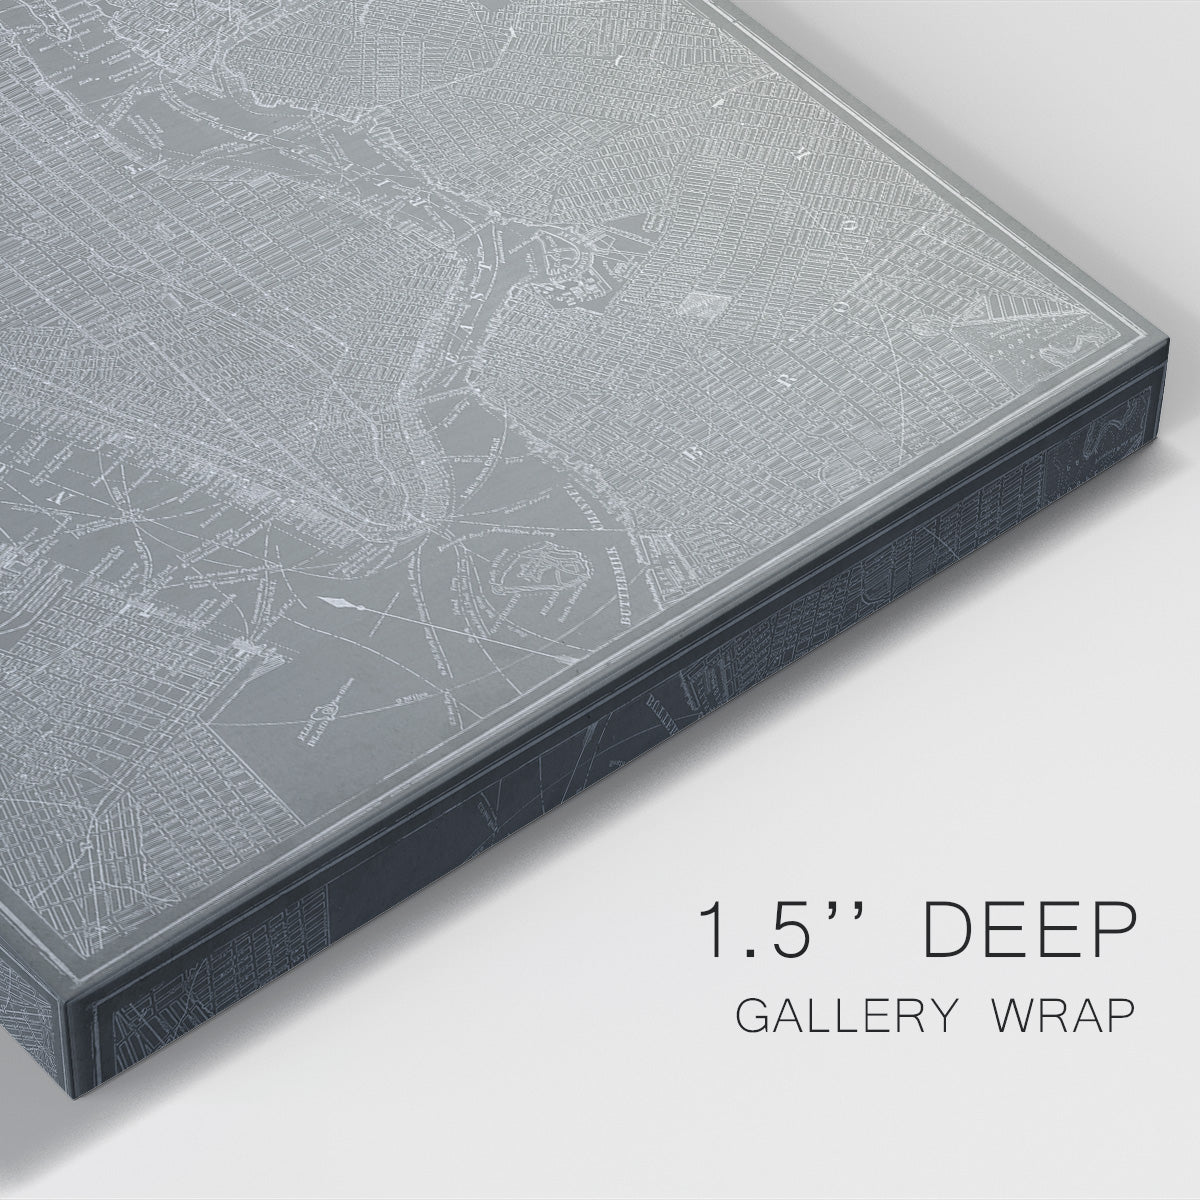 City Map of New York Premium Gallery Wrapped Canvas - Ready to Hang